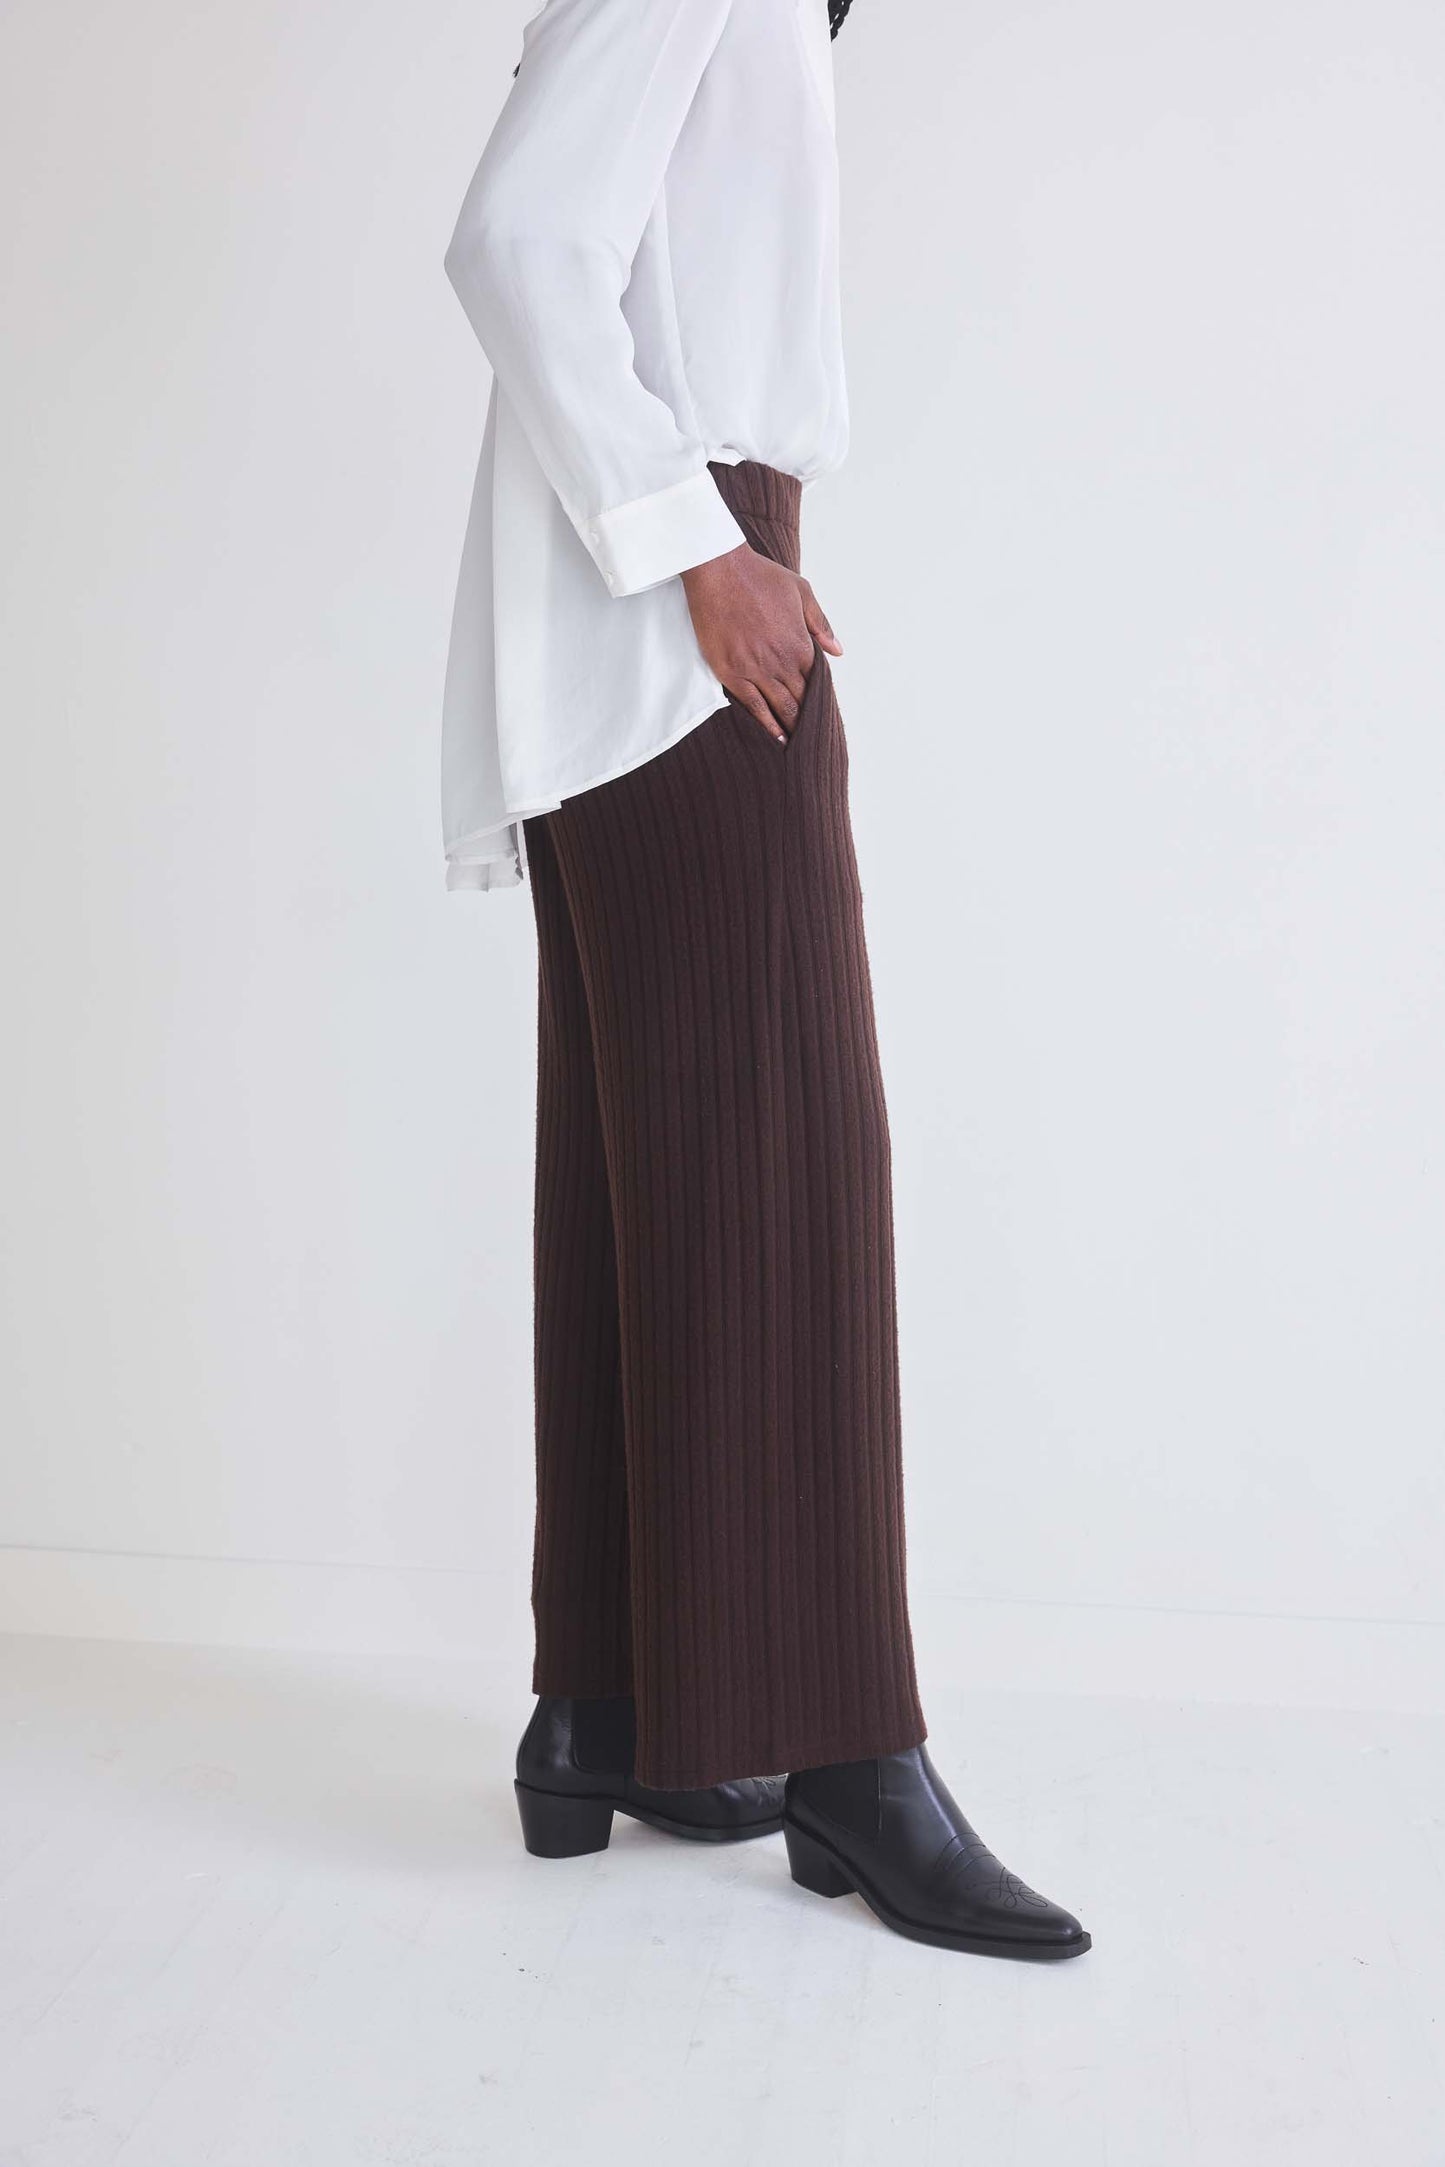 Leisure Flow Ribbed Pants